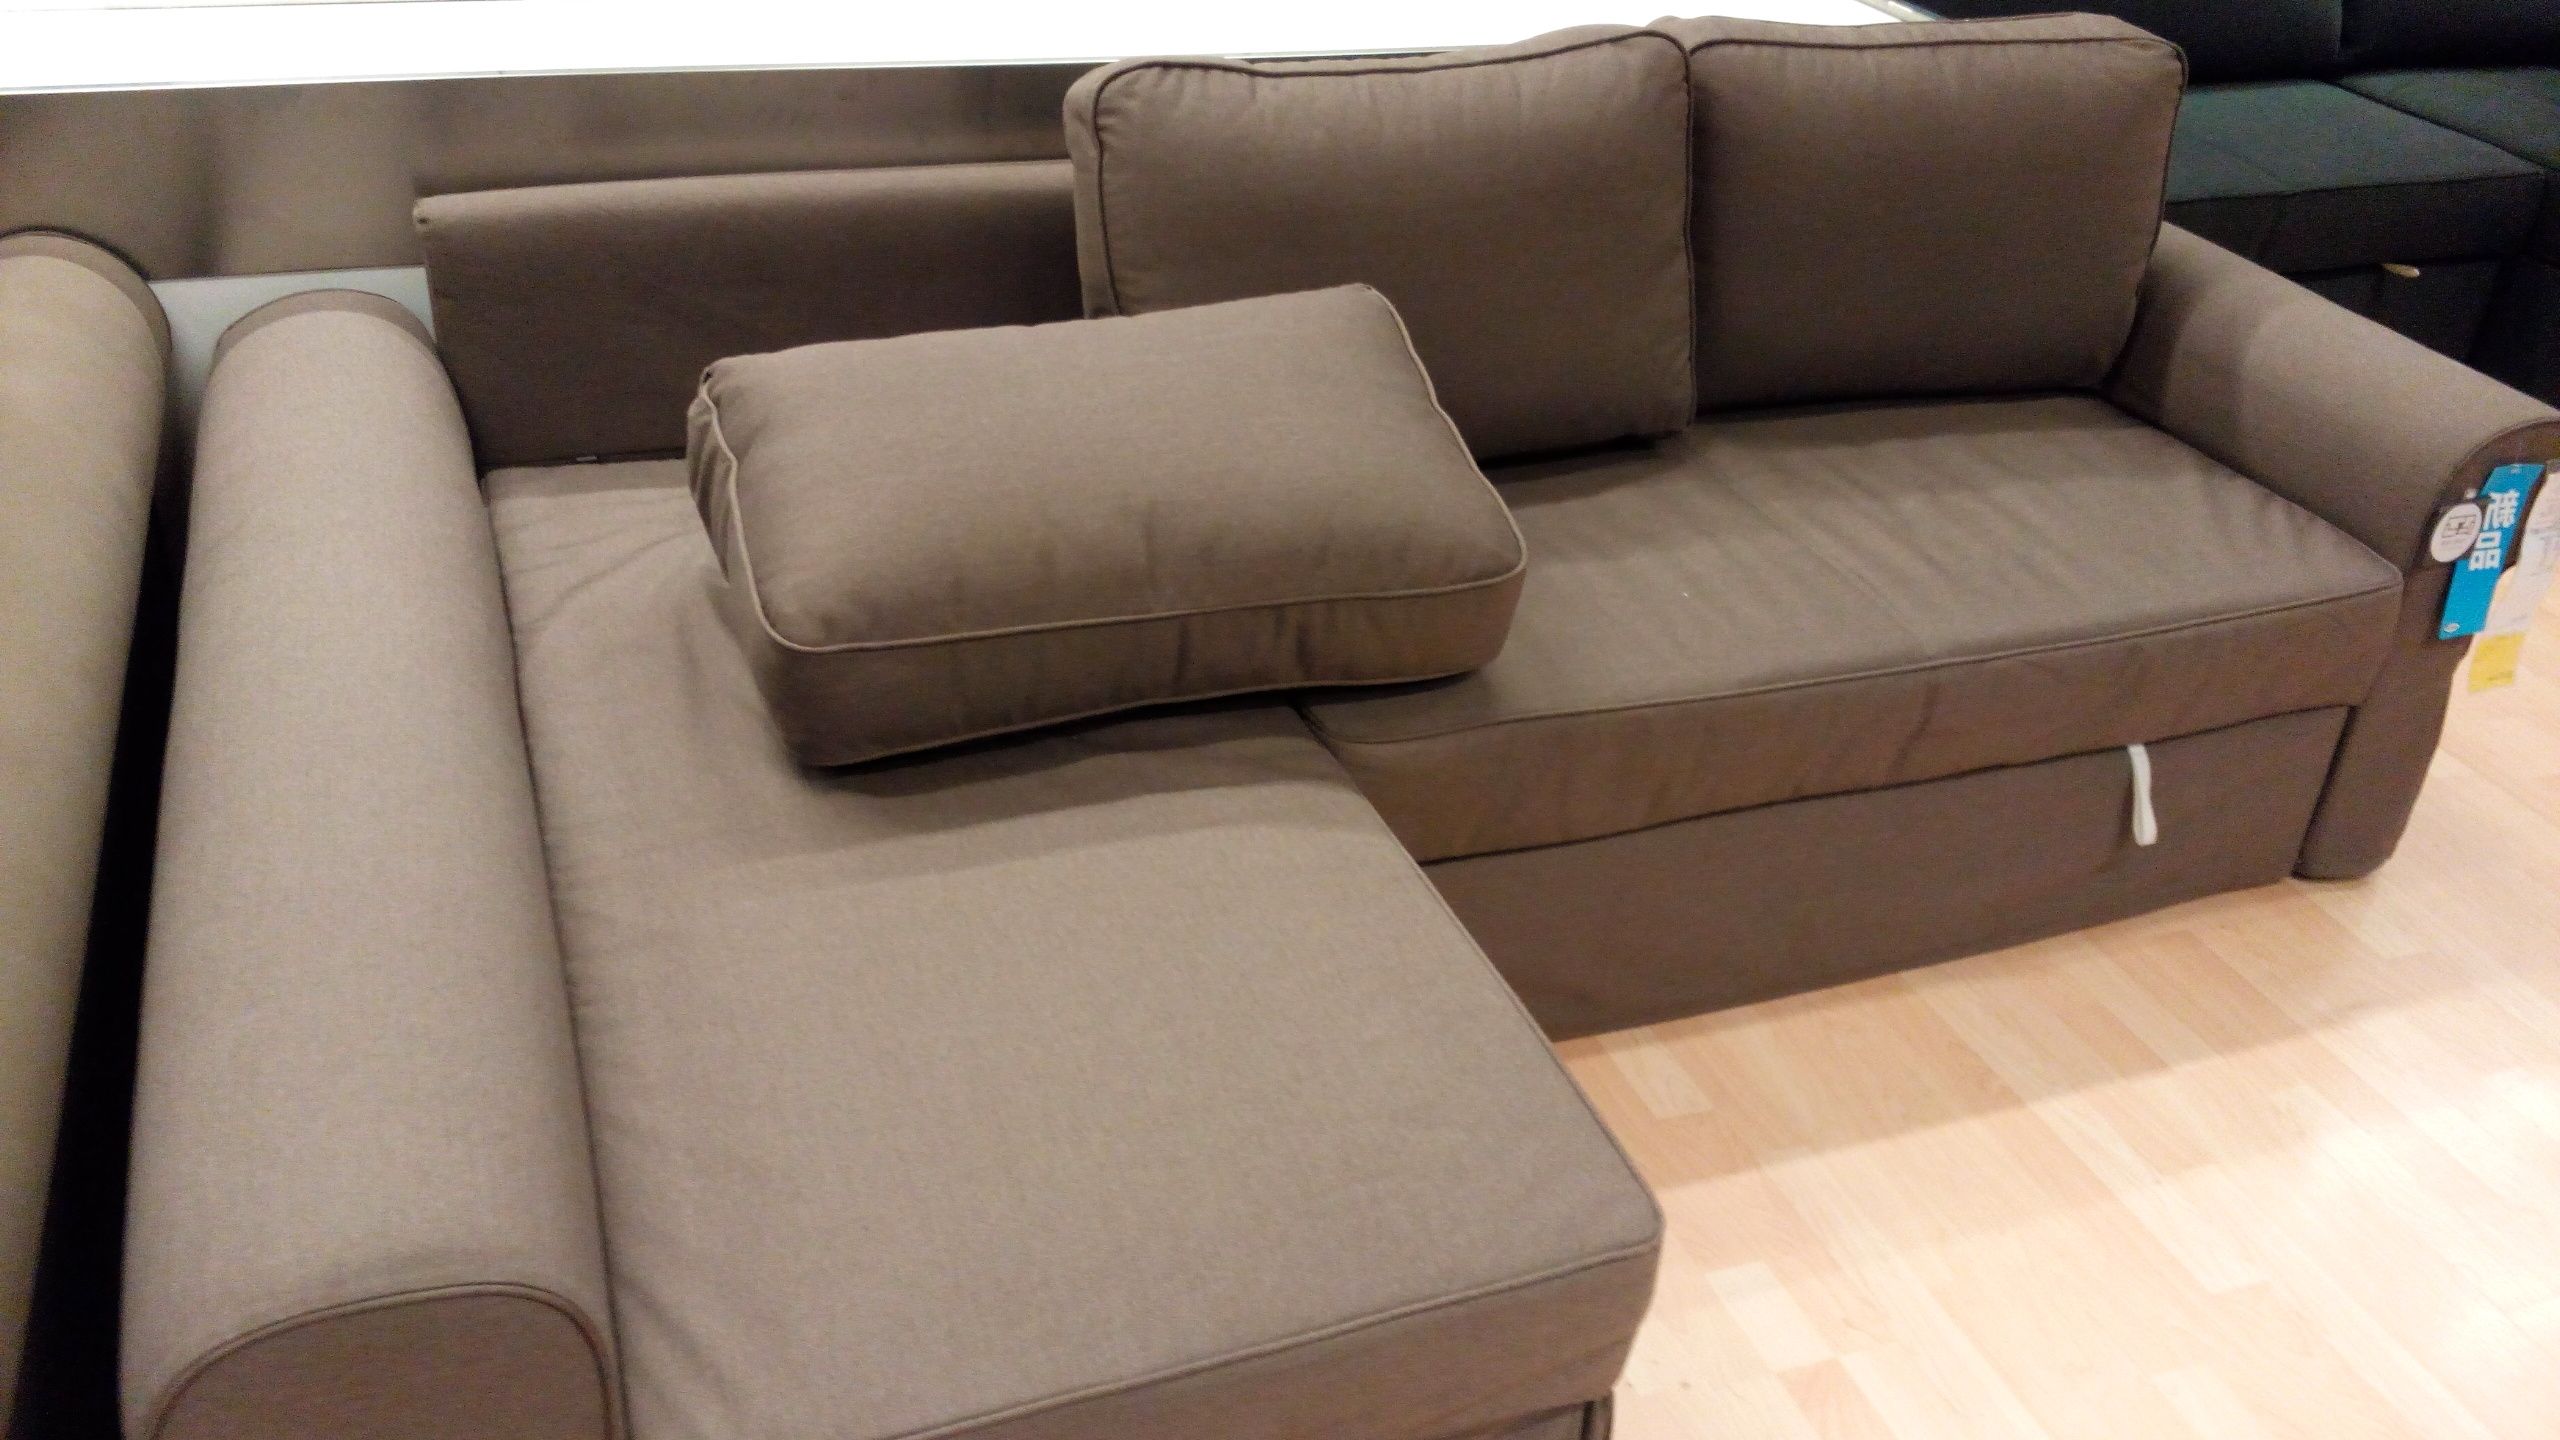 Fashionable Ikea Ektorp Chaises Intended For Ikea Vilasund And Backabro Review – Return Of The Sofa Bed Clones! (View 8 of 15)